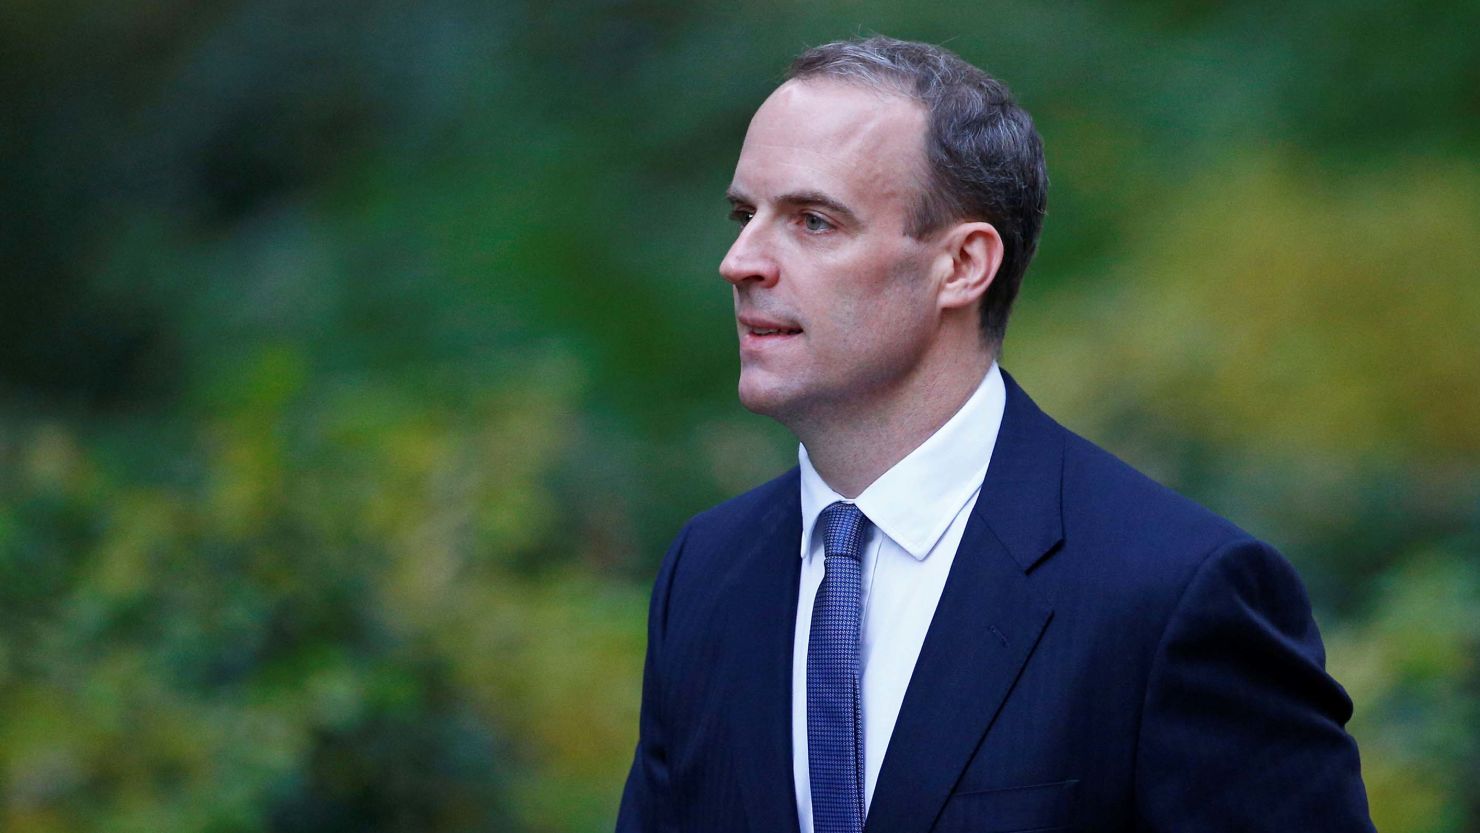 Foreign Secretary Dominic Raab said British children in Syria are being repatriated.